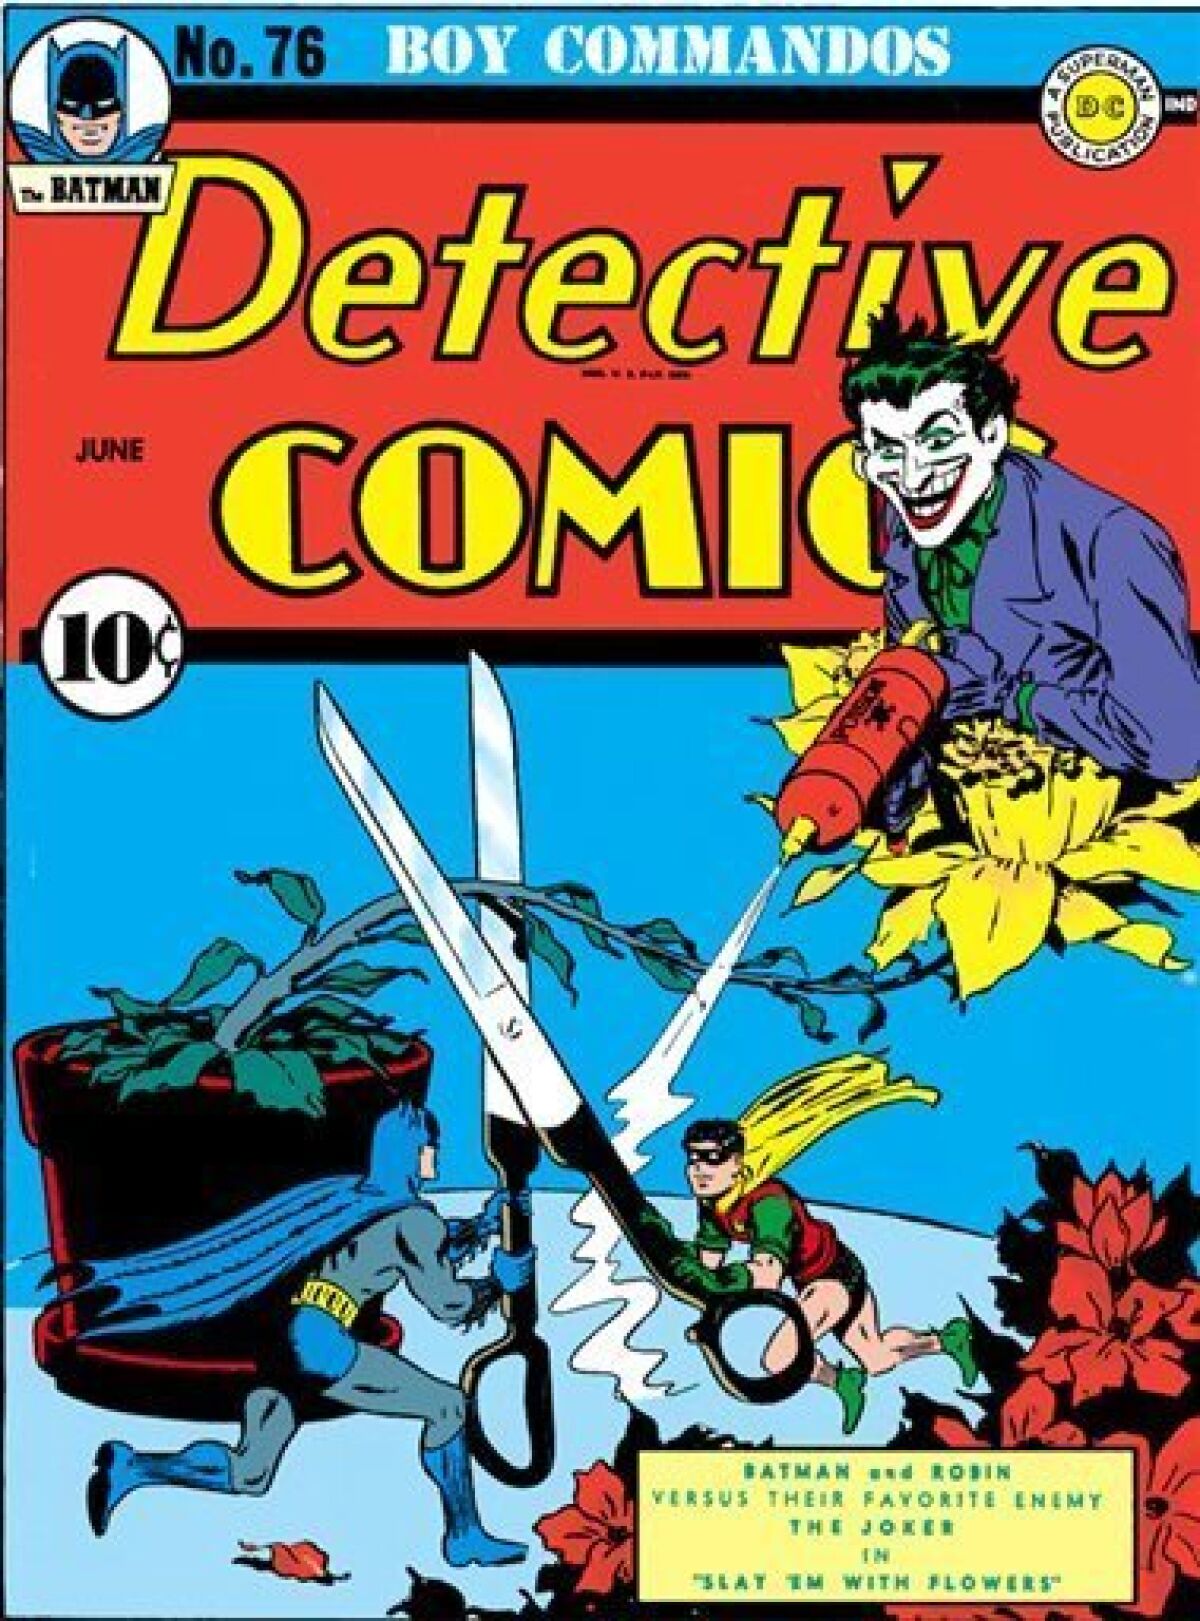 In this undated photo provided by DC Comics, the issue 76 cover of "The Batman Detective Comics" is shown. Jerry Robinson, the artist who helped create "The Joker" in the Batman series has died on Wednesday, Dec. 7, 2011 in New York City. He was 89. (AP Photo/DC Comics, Jerry Robinson)